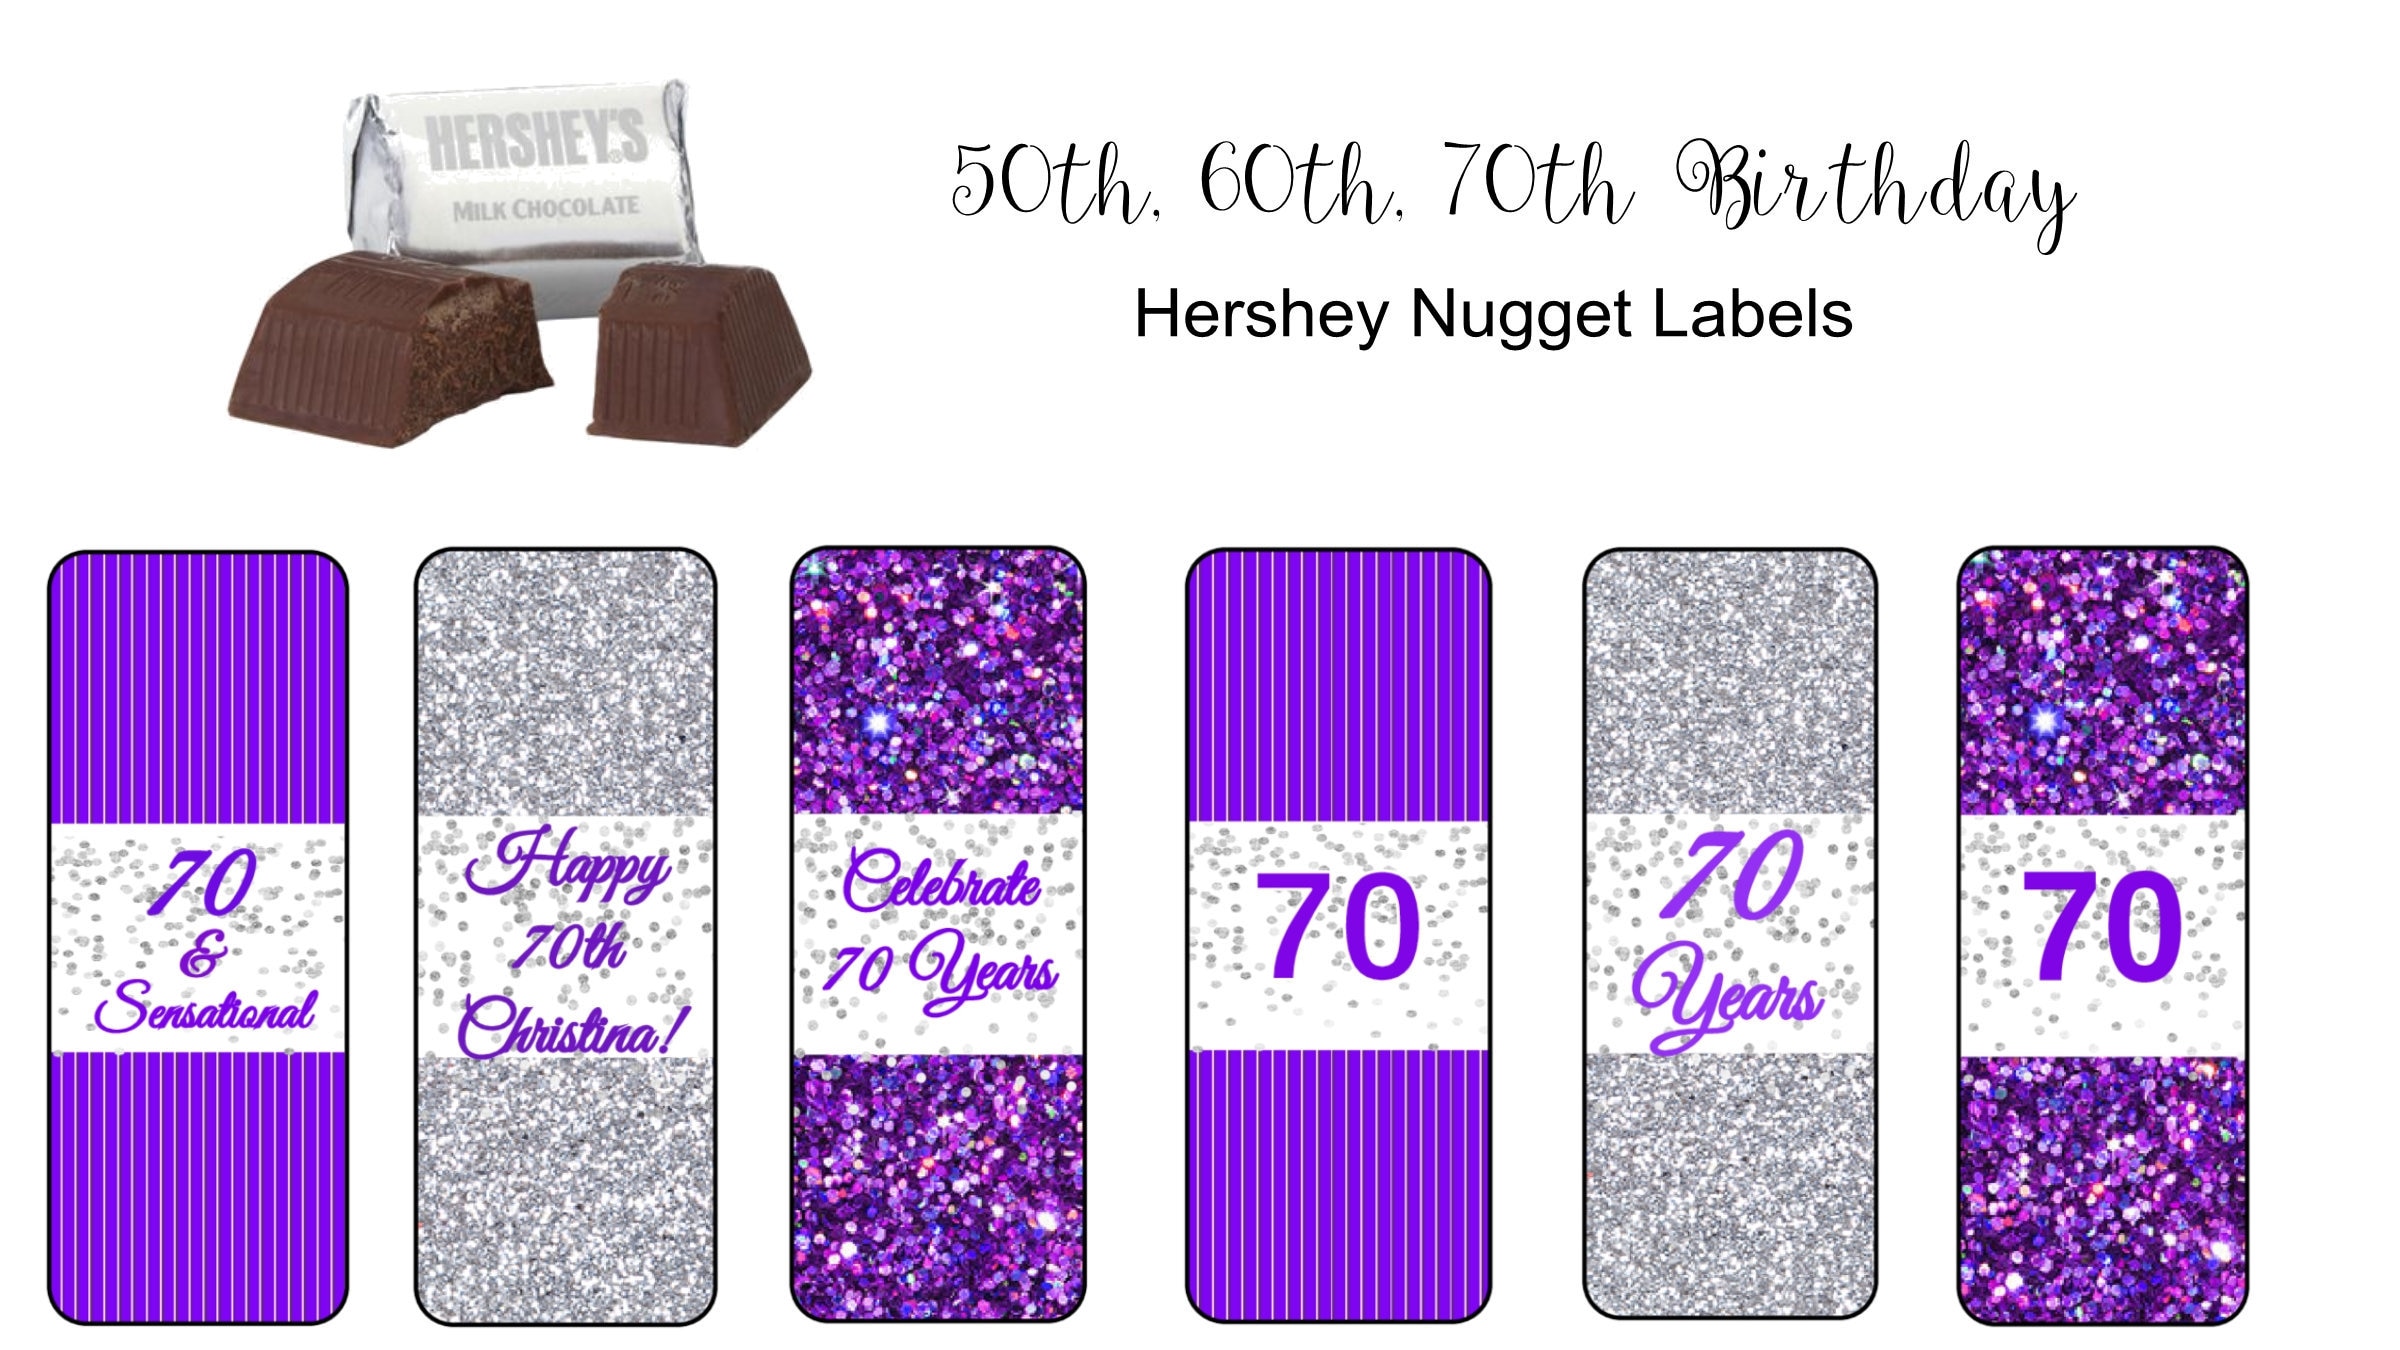 30 DAISY DUCK PERSONALIZED HERSHEY's NUGGET WRAPPERS BIRTHDAY PARTY FAVORS 